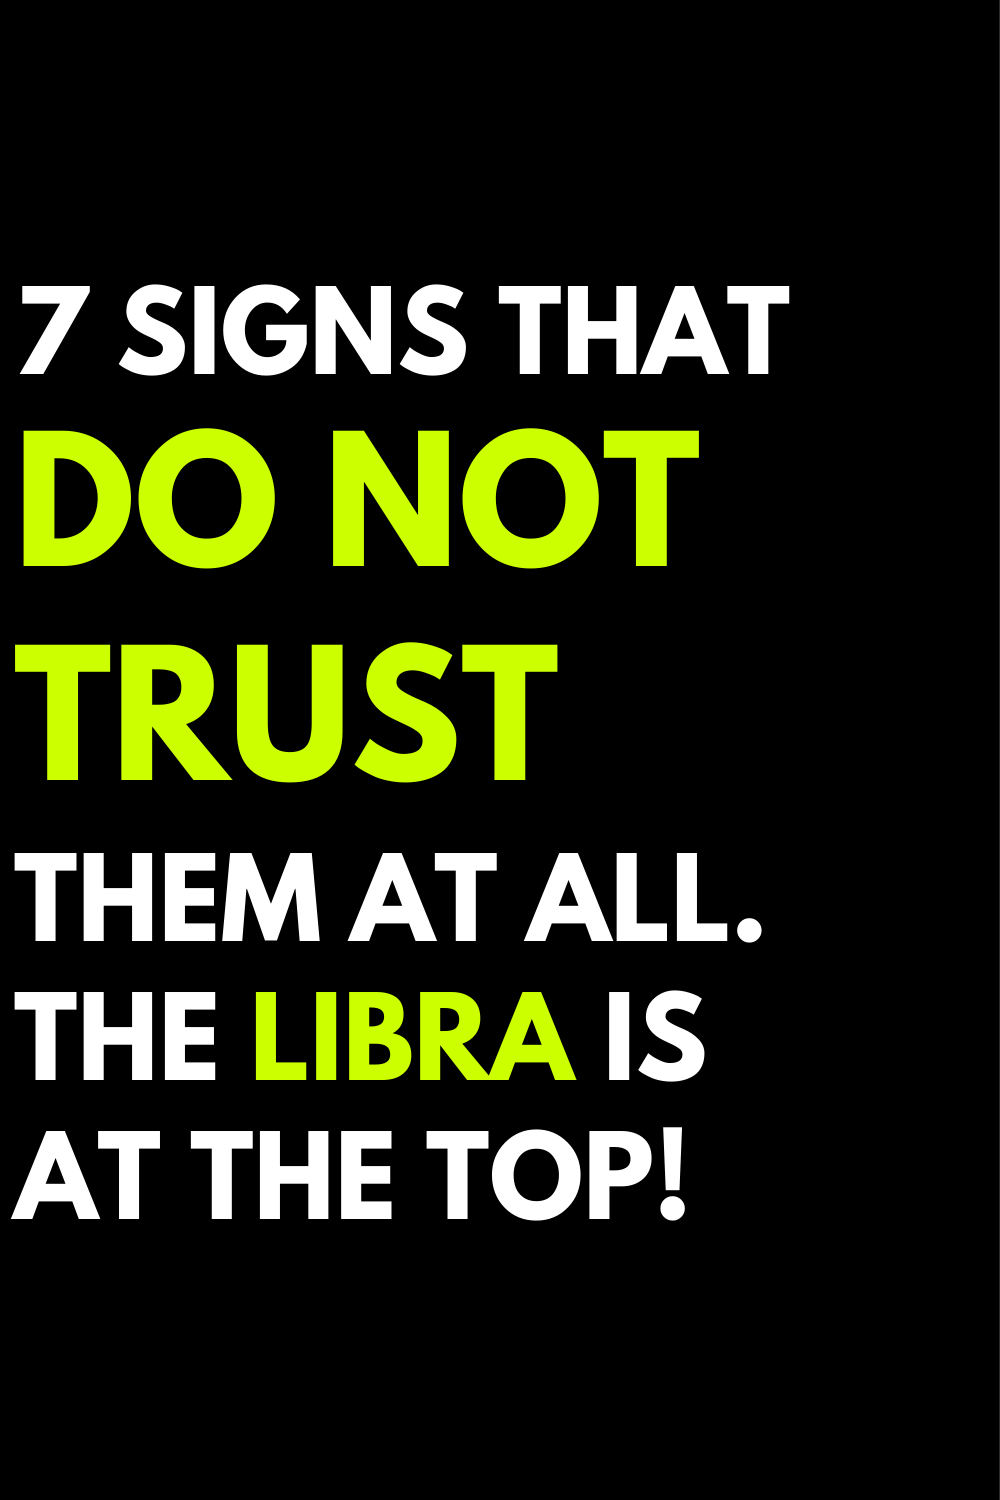 7 signs that do not trust them at all. The Libra is at the top!